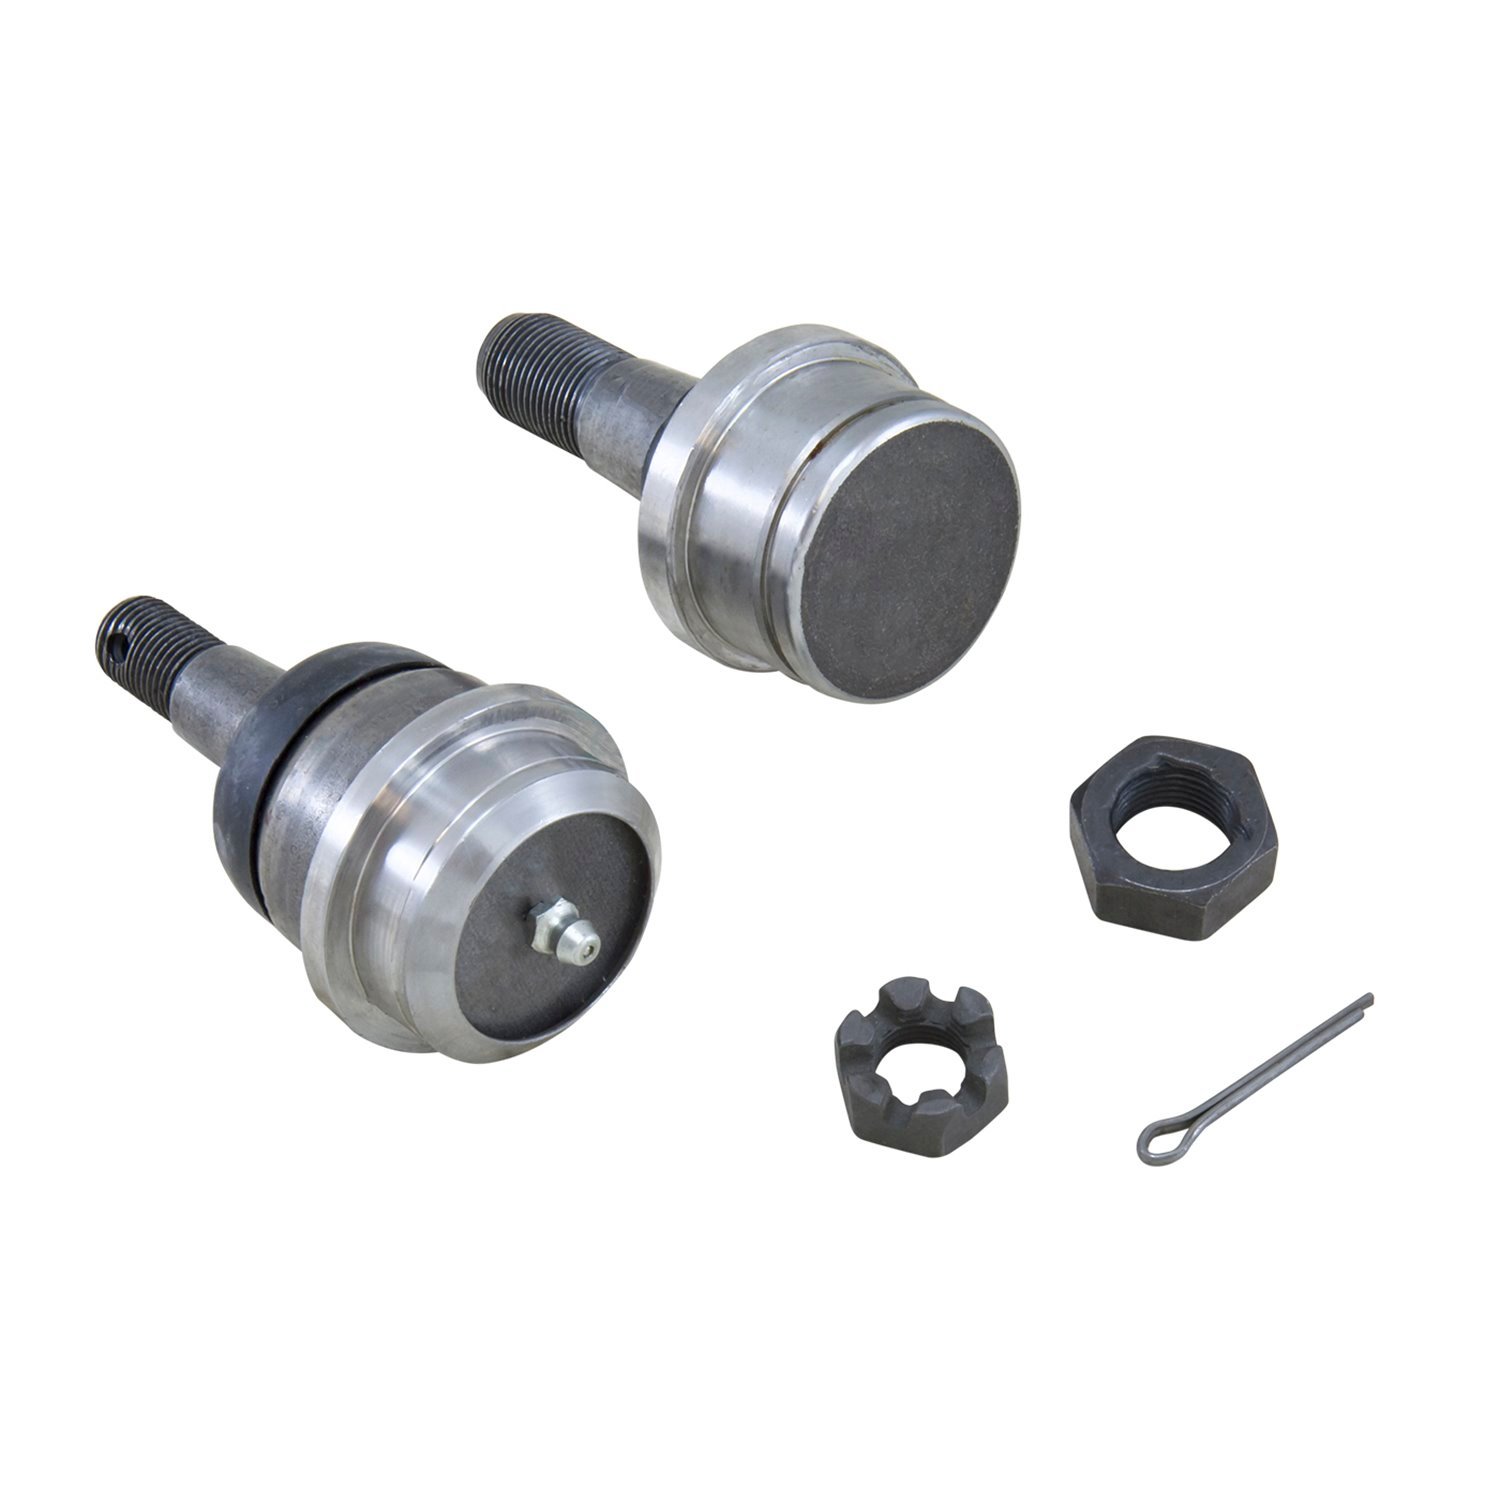 Ball Joint Kit For Dana 44 Differential, 2000-2001